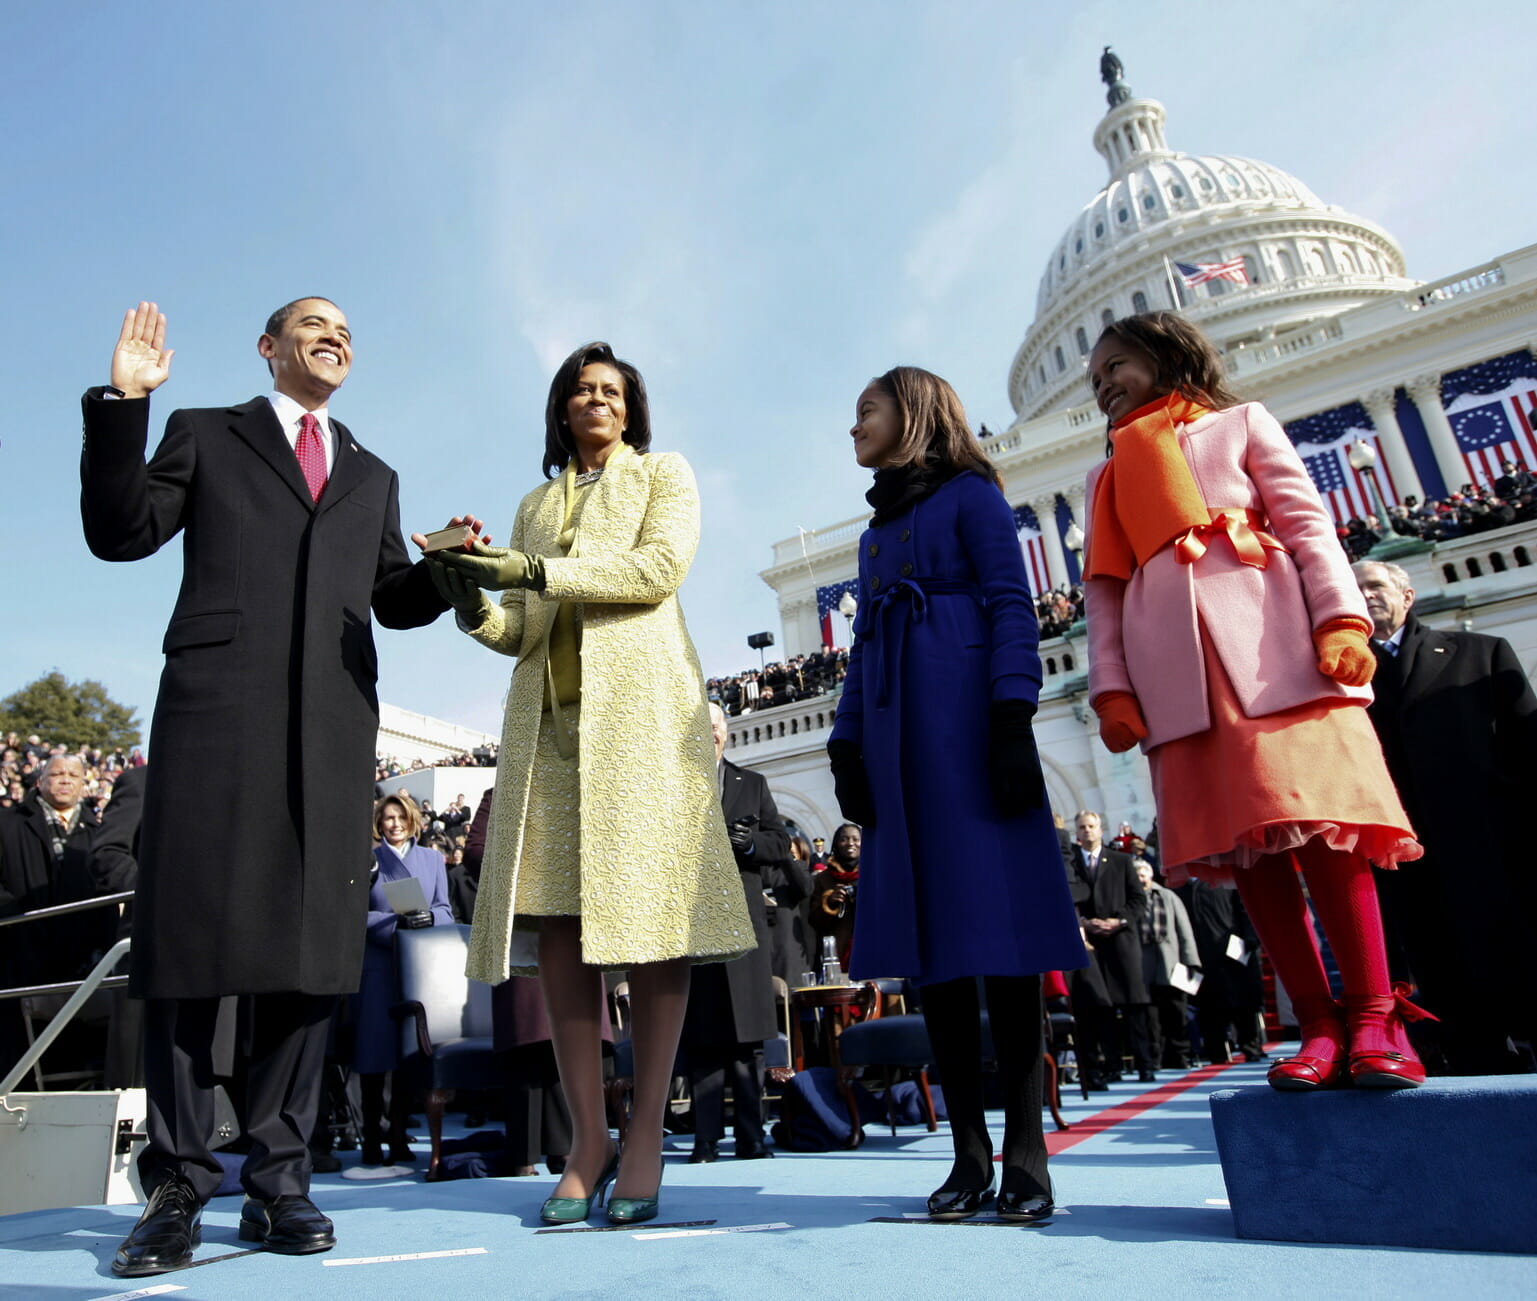 Obama-outside-with-overcoat-in-2009